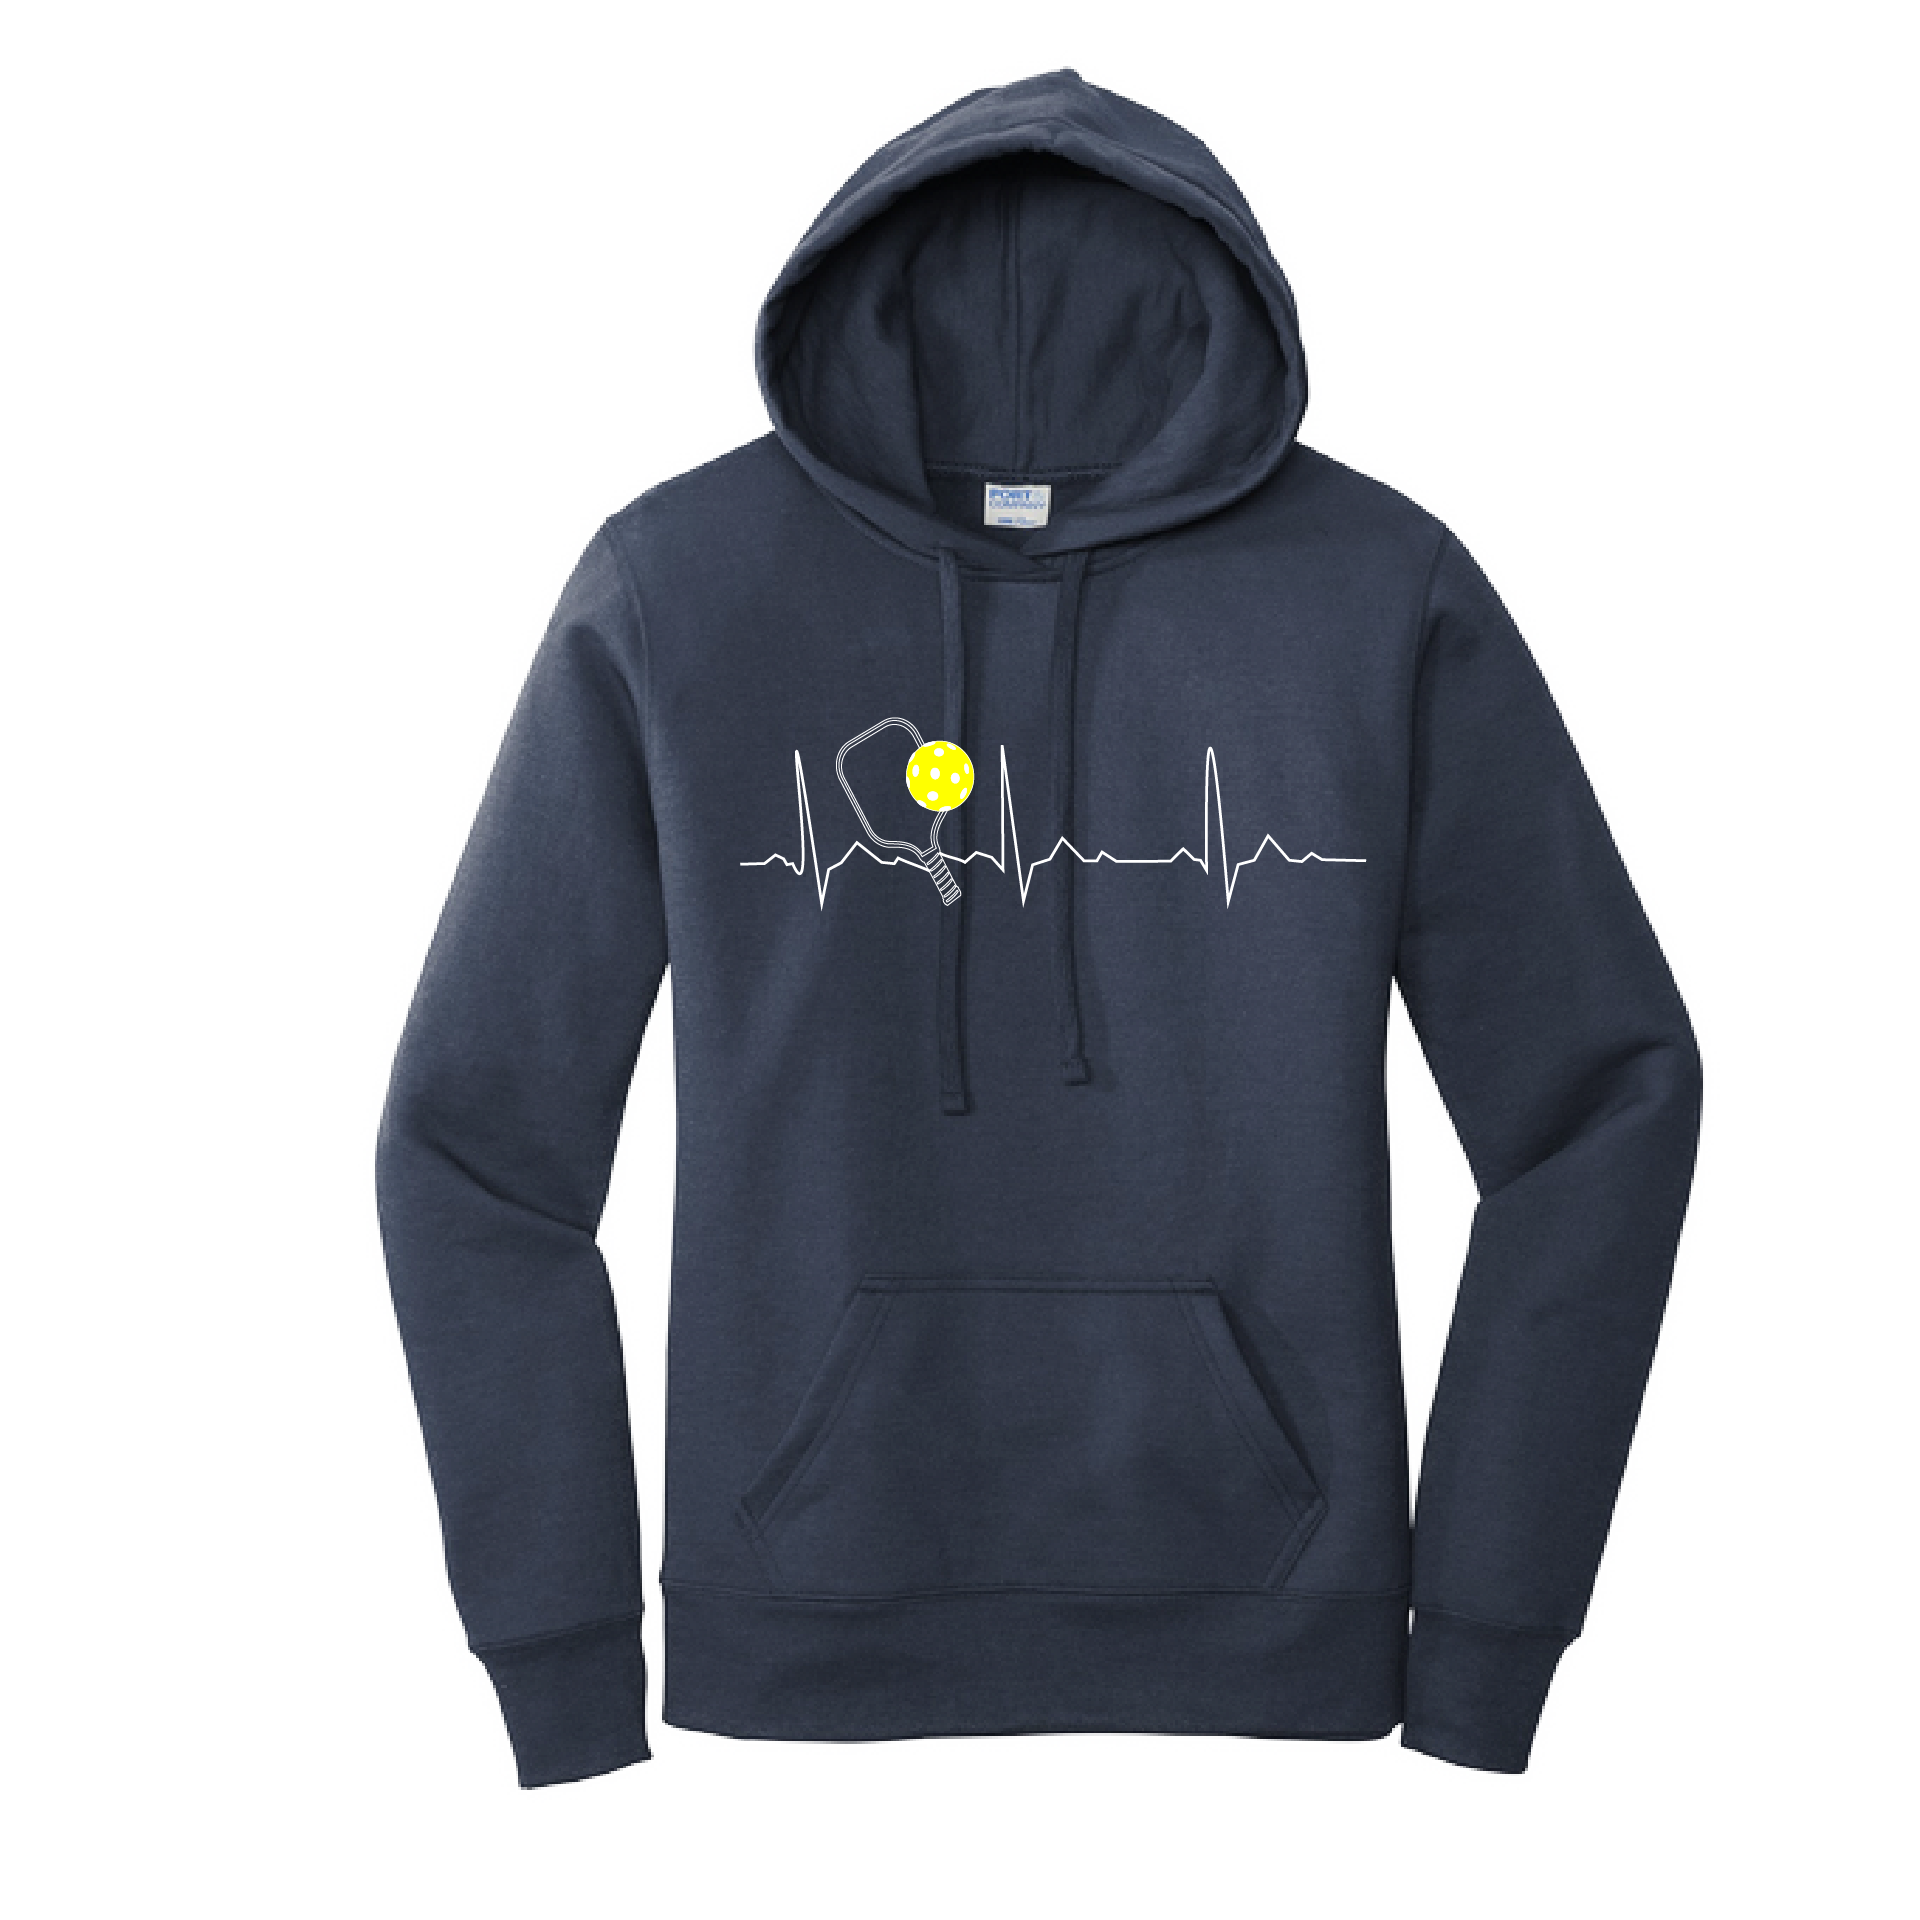 Pickleball Design: Heartbeat  Women's Hooded pullover Sweatshirt  Turn up the volume in this Women's Sweatshirts with its perfect mix of softness and attitude. Ultra soft lined inside with a lined hood also. This is fitted nicely for a women's figure. Front pouch pocket.